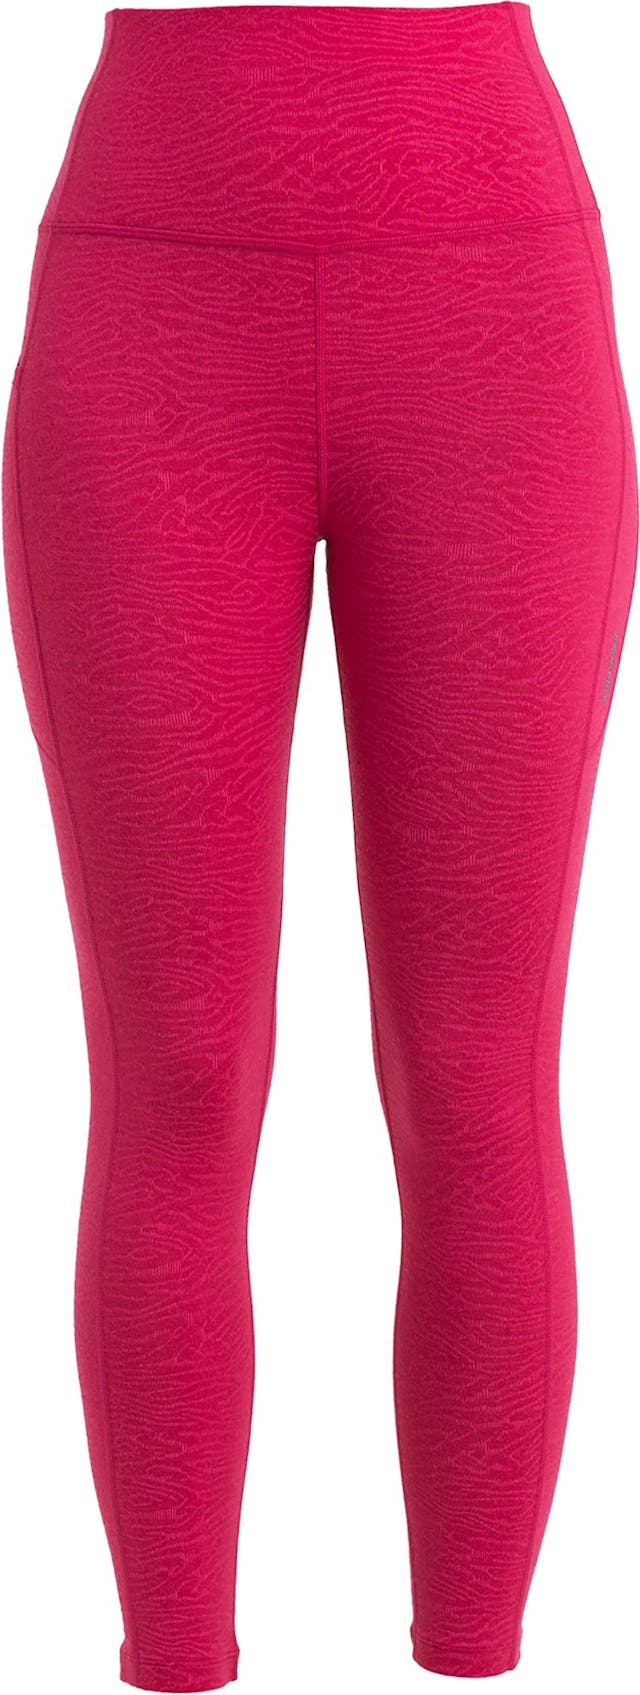 Product image for Merino Fastray High Rise Tights Topo Lines - Women's